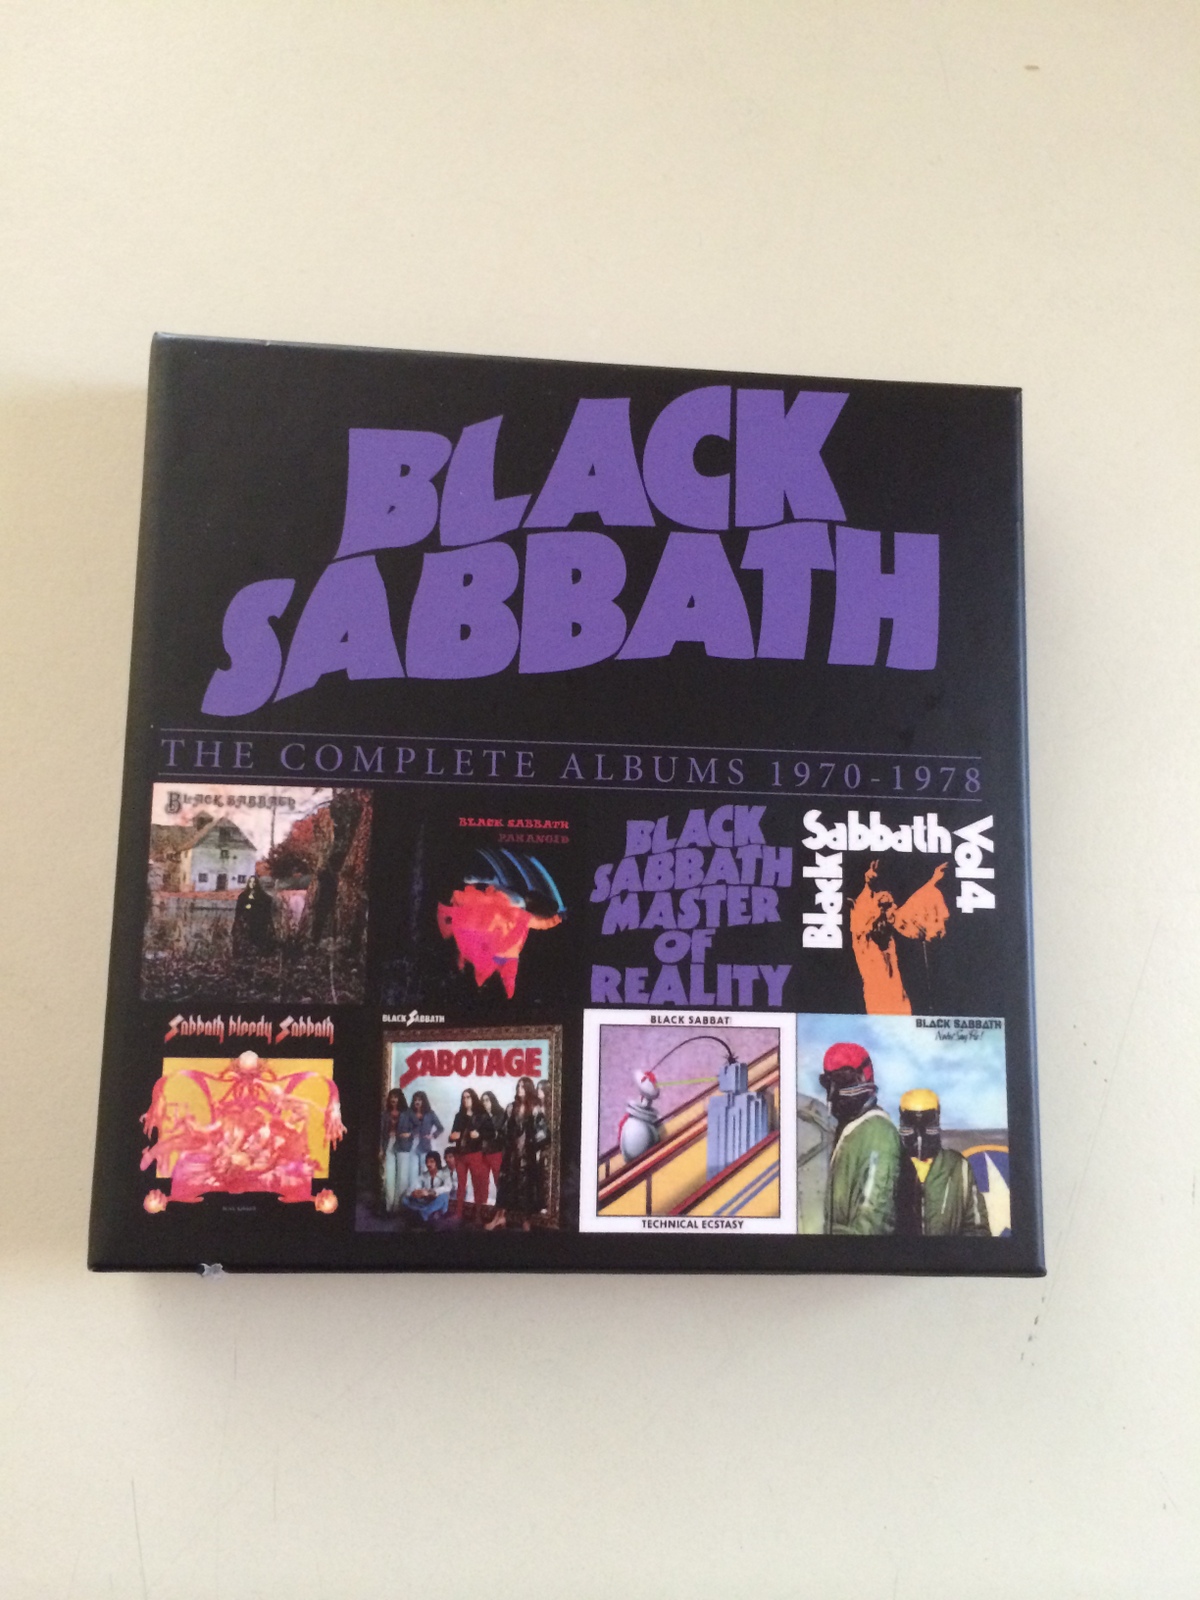 Some Thoughts on “Complete Albums” Box – Black Sabbath Online